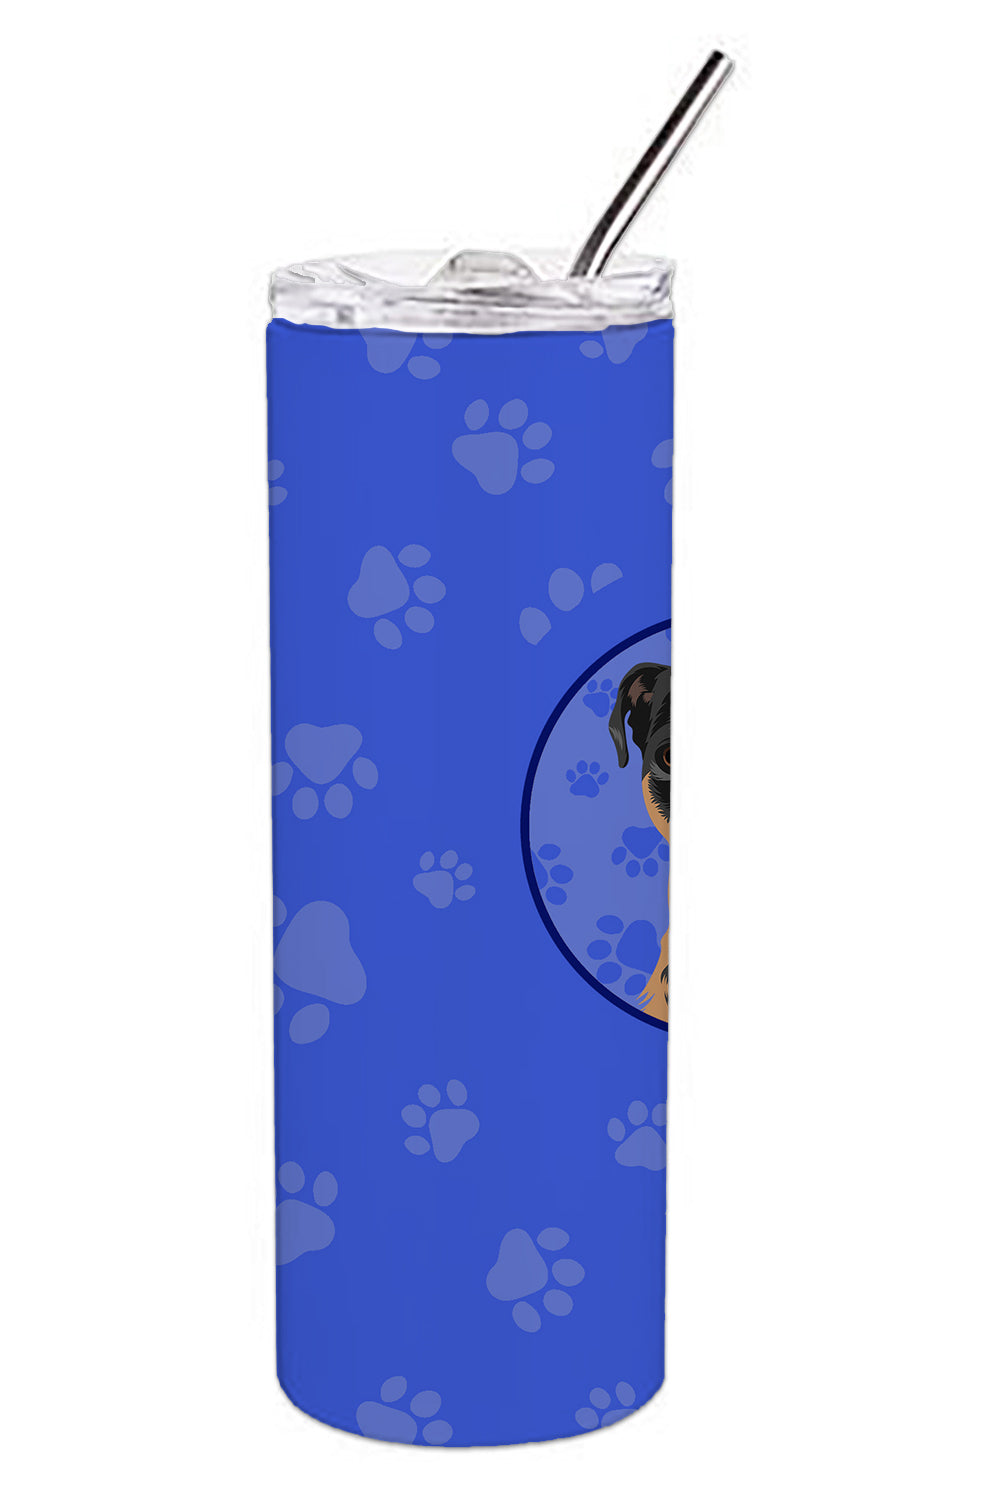 Buy this Rottweiler Black and Tan #2  Stainless Steel 20 oz Skinny Tumbler